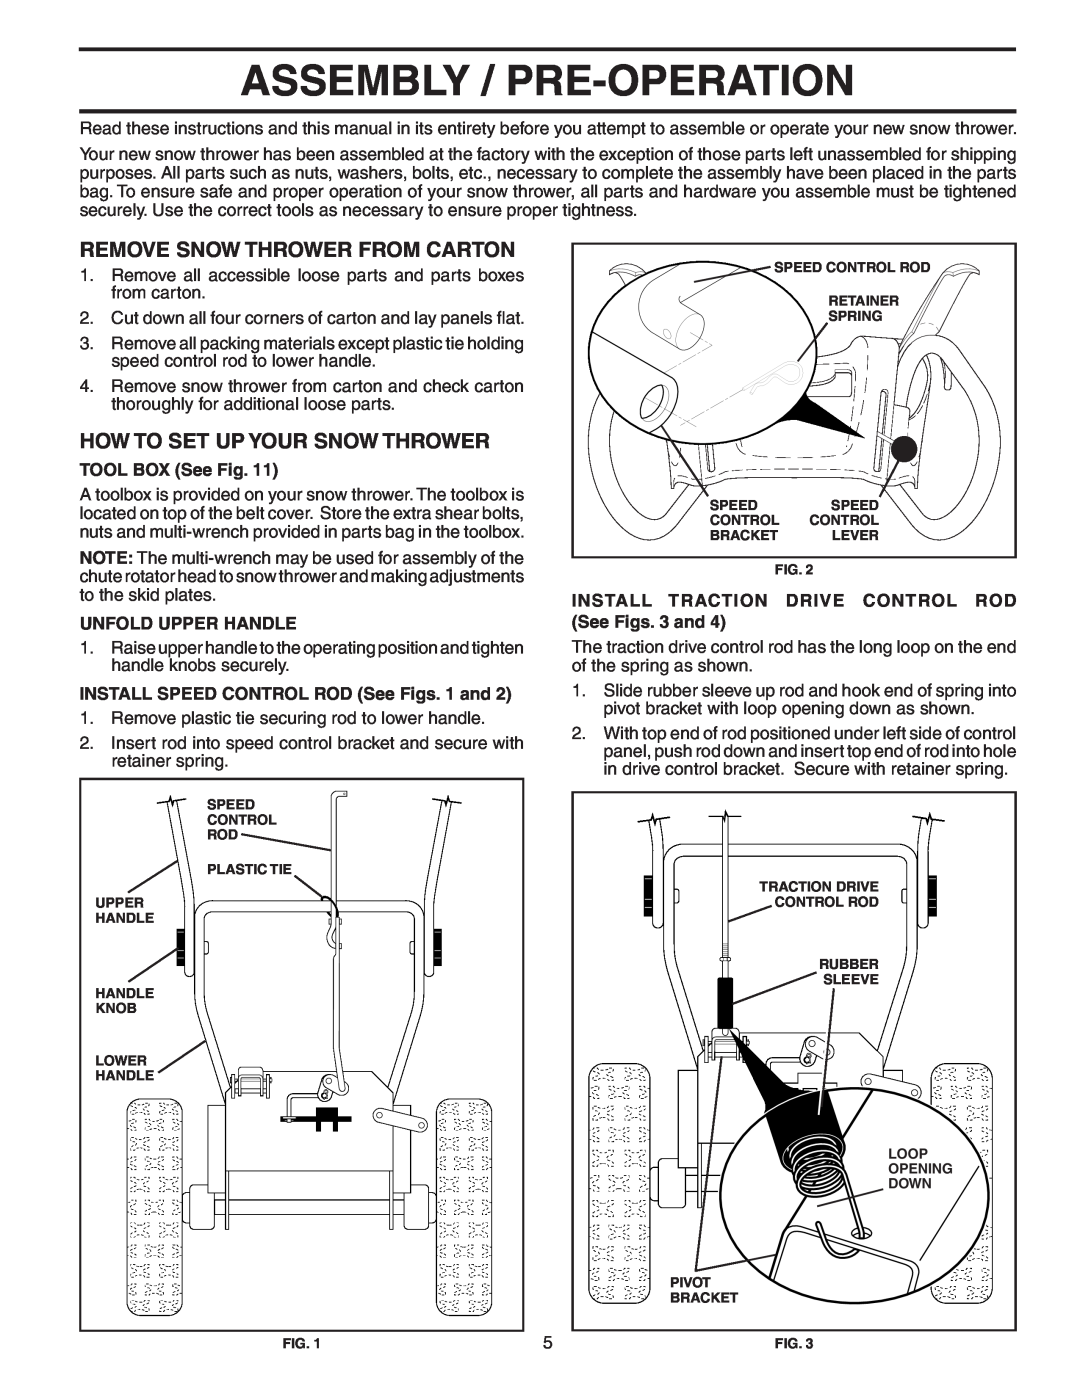 Poulan P8527ESA owner manual Assembly / Pre-Operation, Remove Snow Thrower From Carton, How To Set Up Your Snow Thrower 